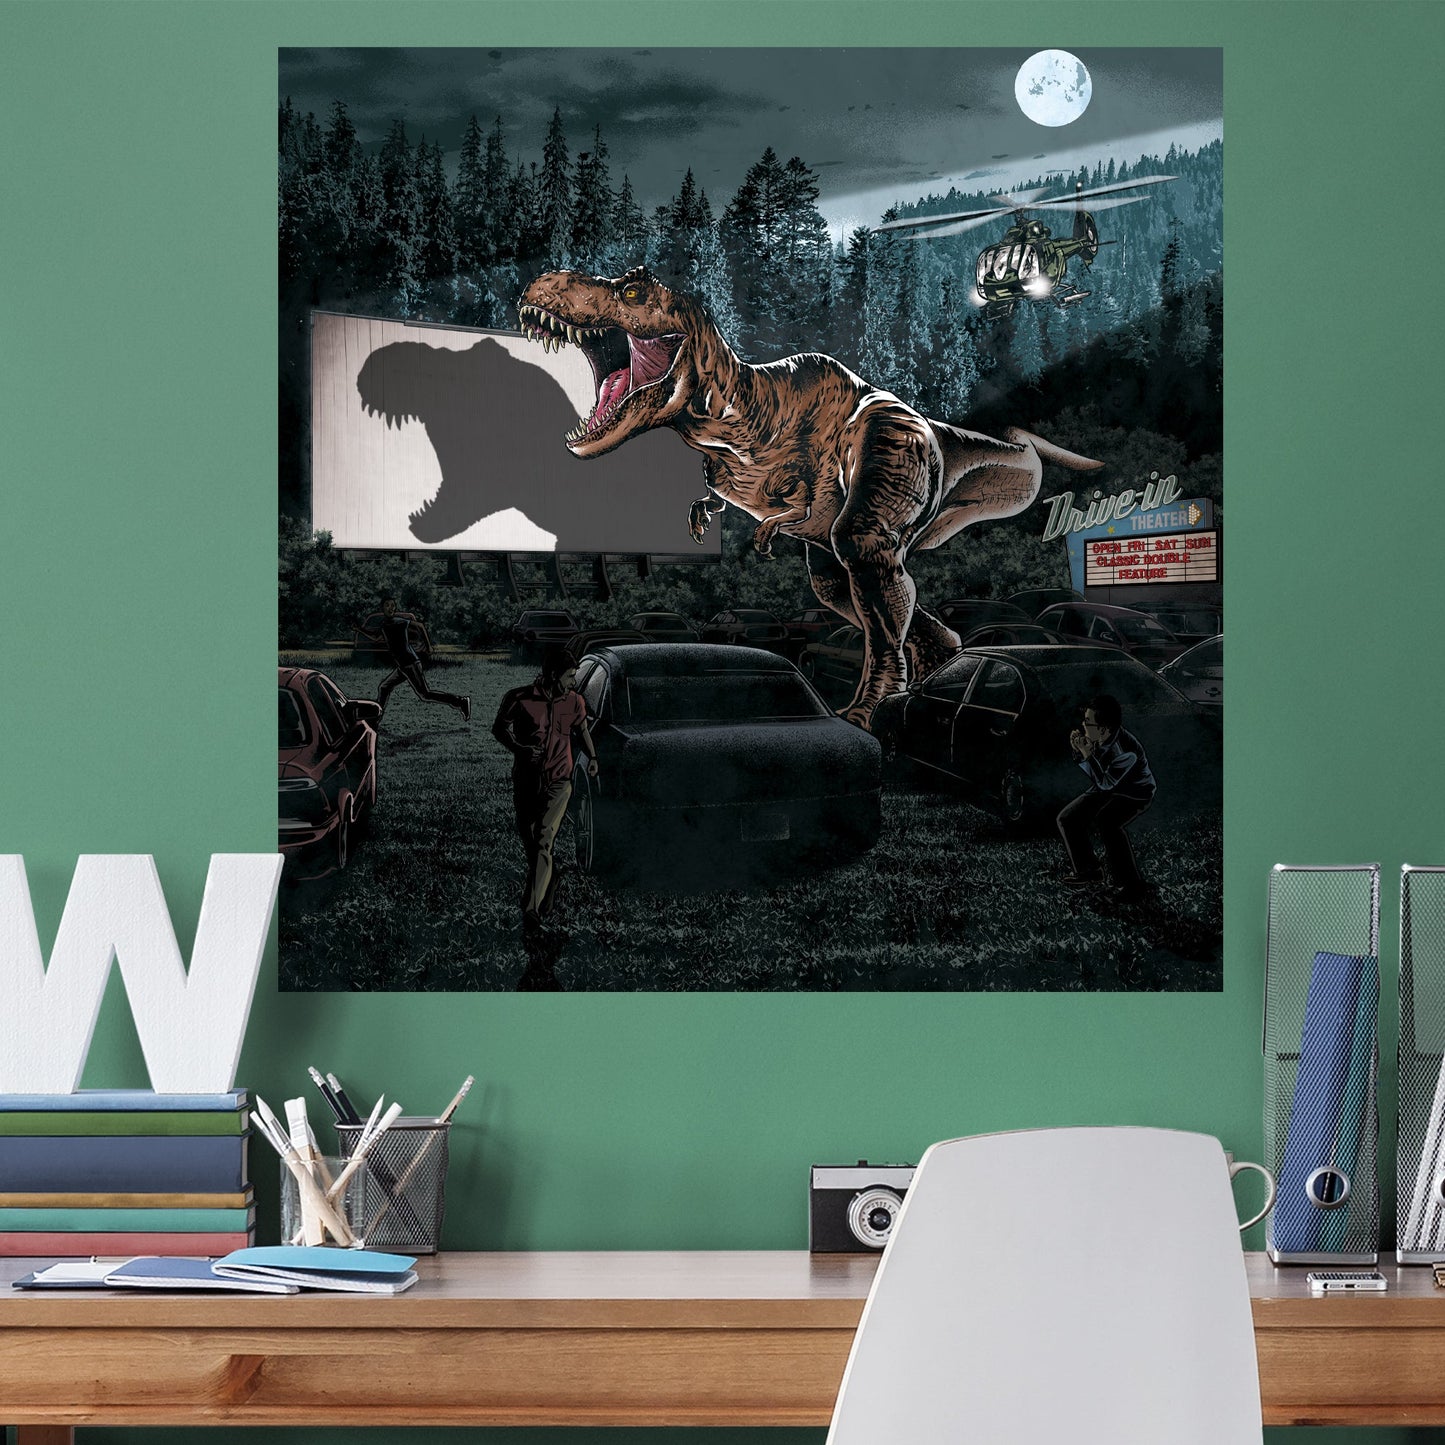 Jurassic World Dominion: T-Rex Drive-In Scene Poster - Officially Licensed NBC Universal Removable Adhesive Decal